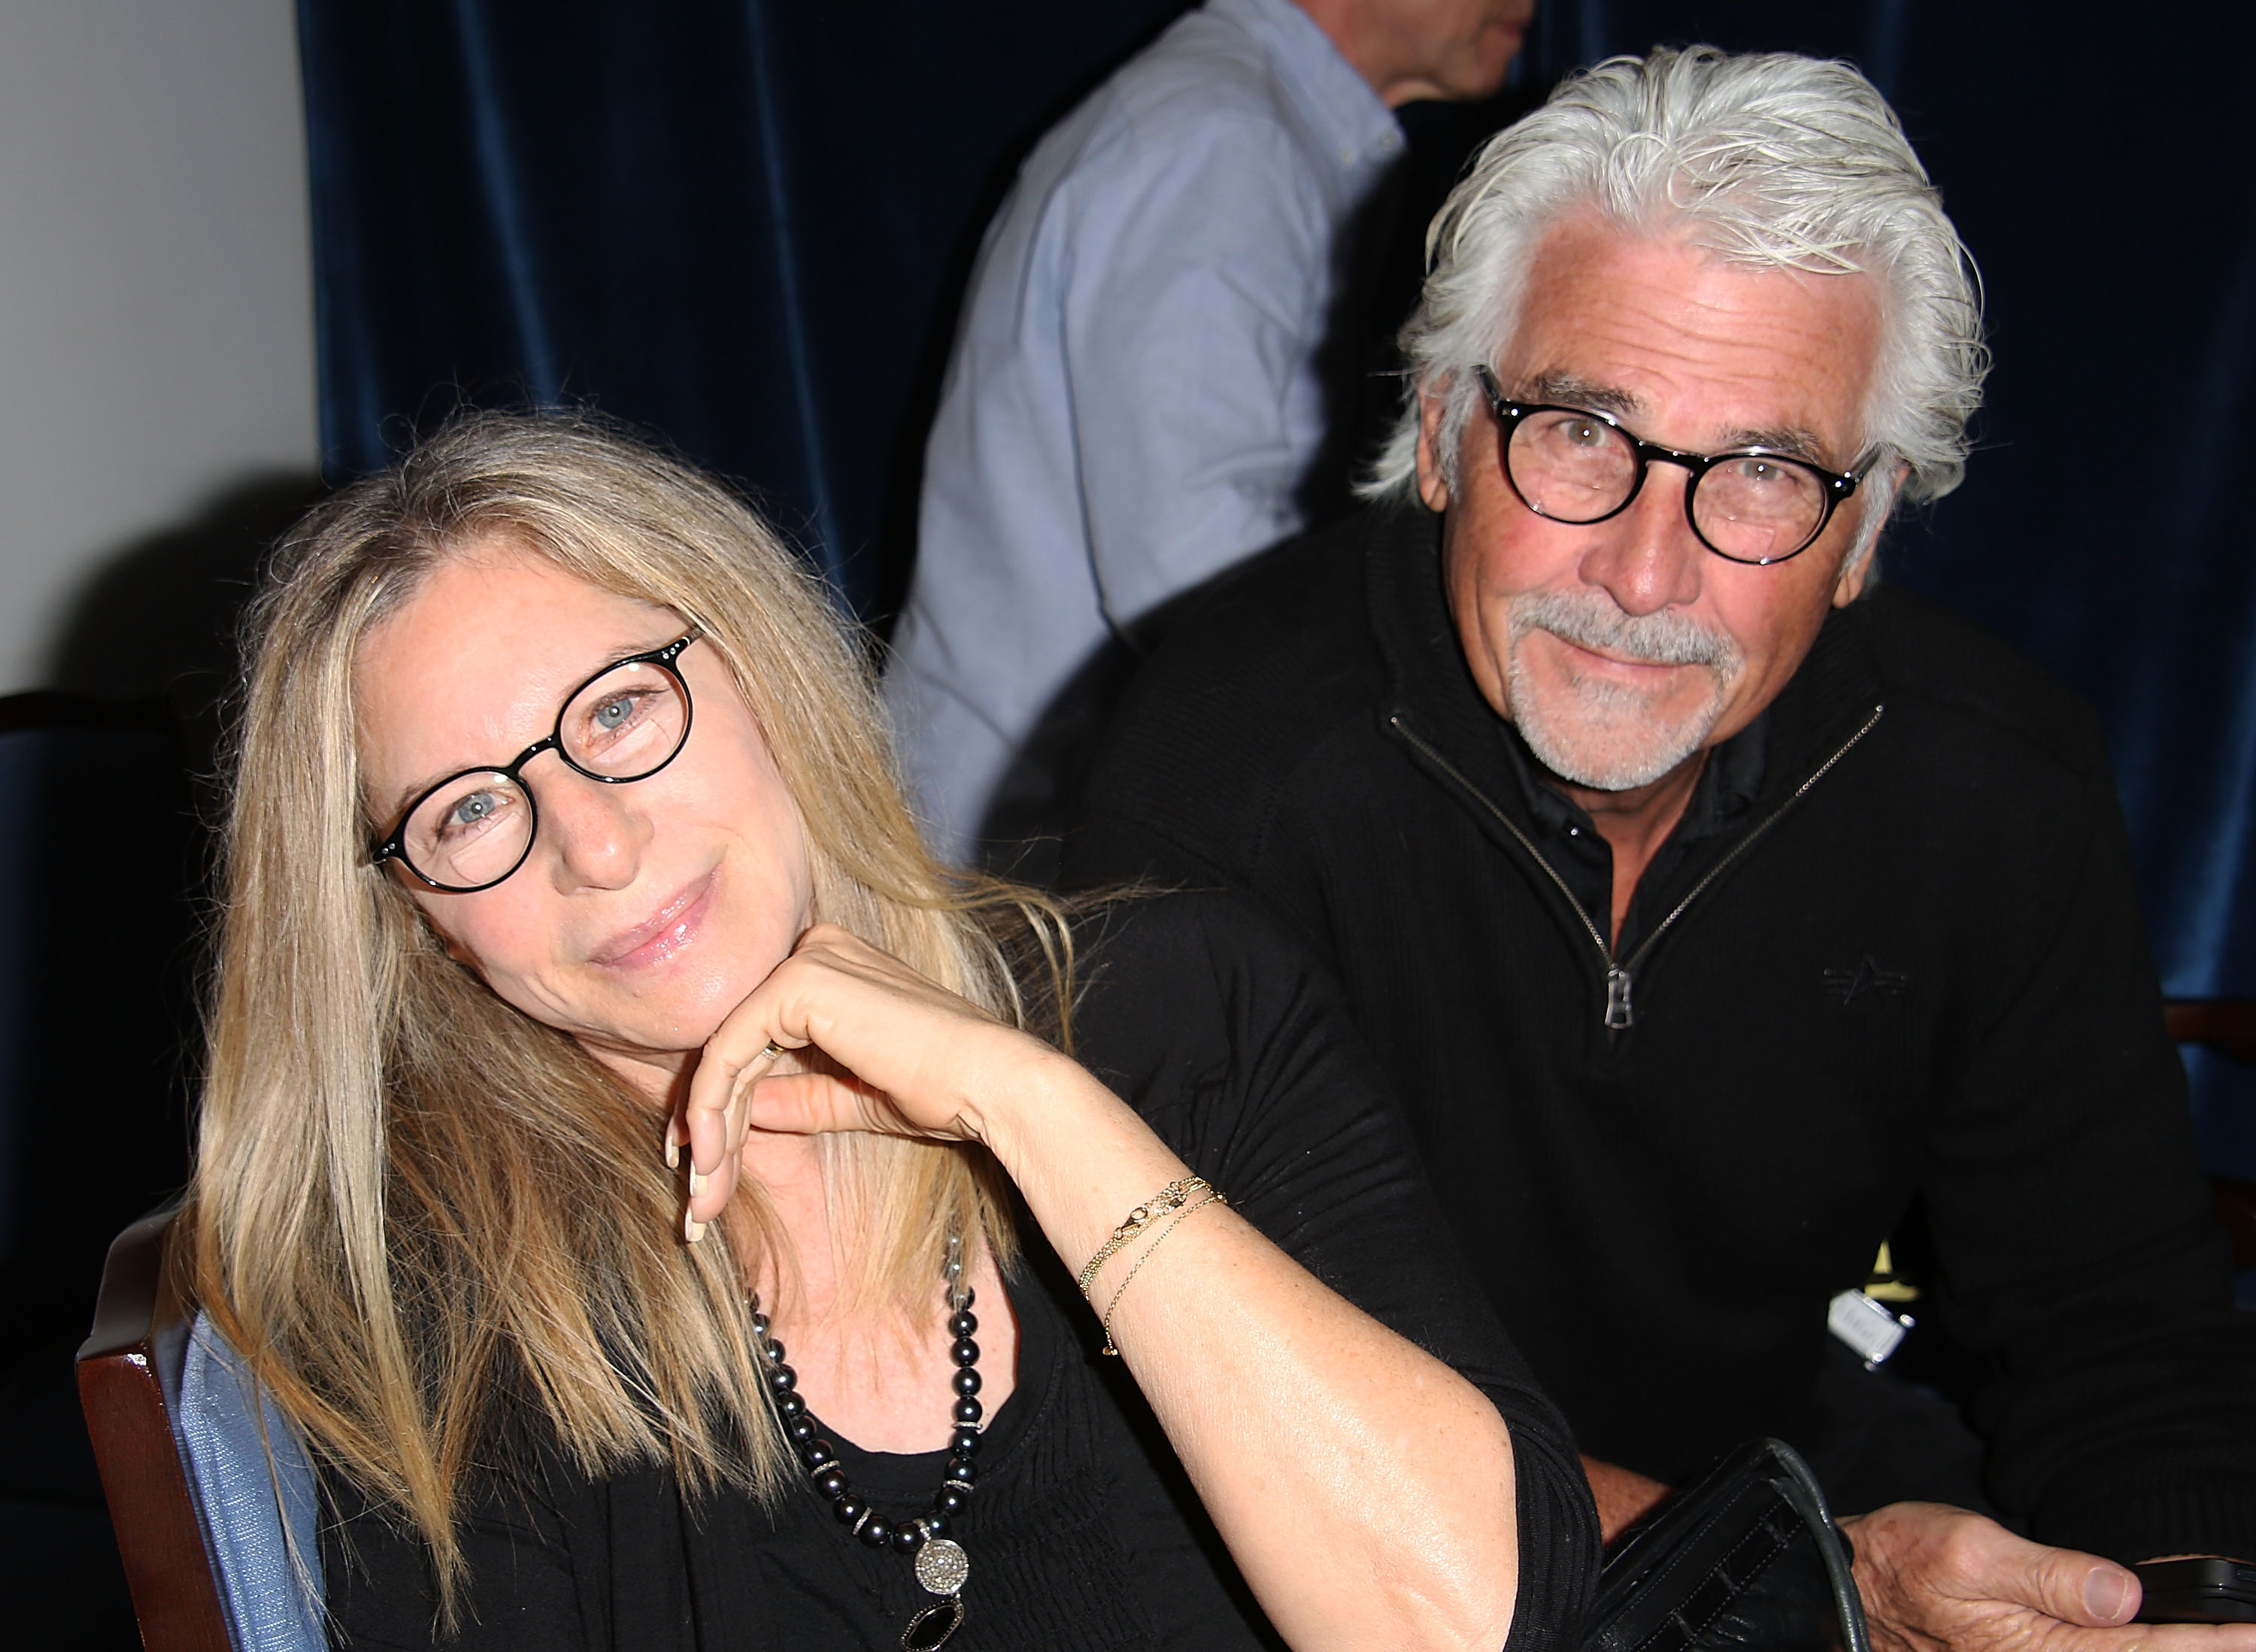 Barbra Streisand and James Brolin attend the premiere of "And So It Goes," 2014 | Source: Getty Images